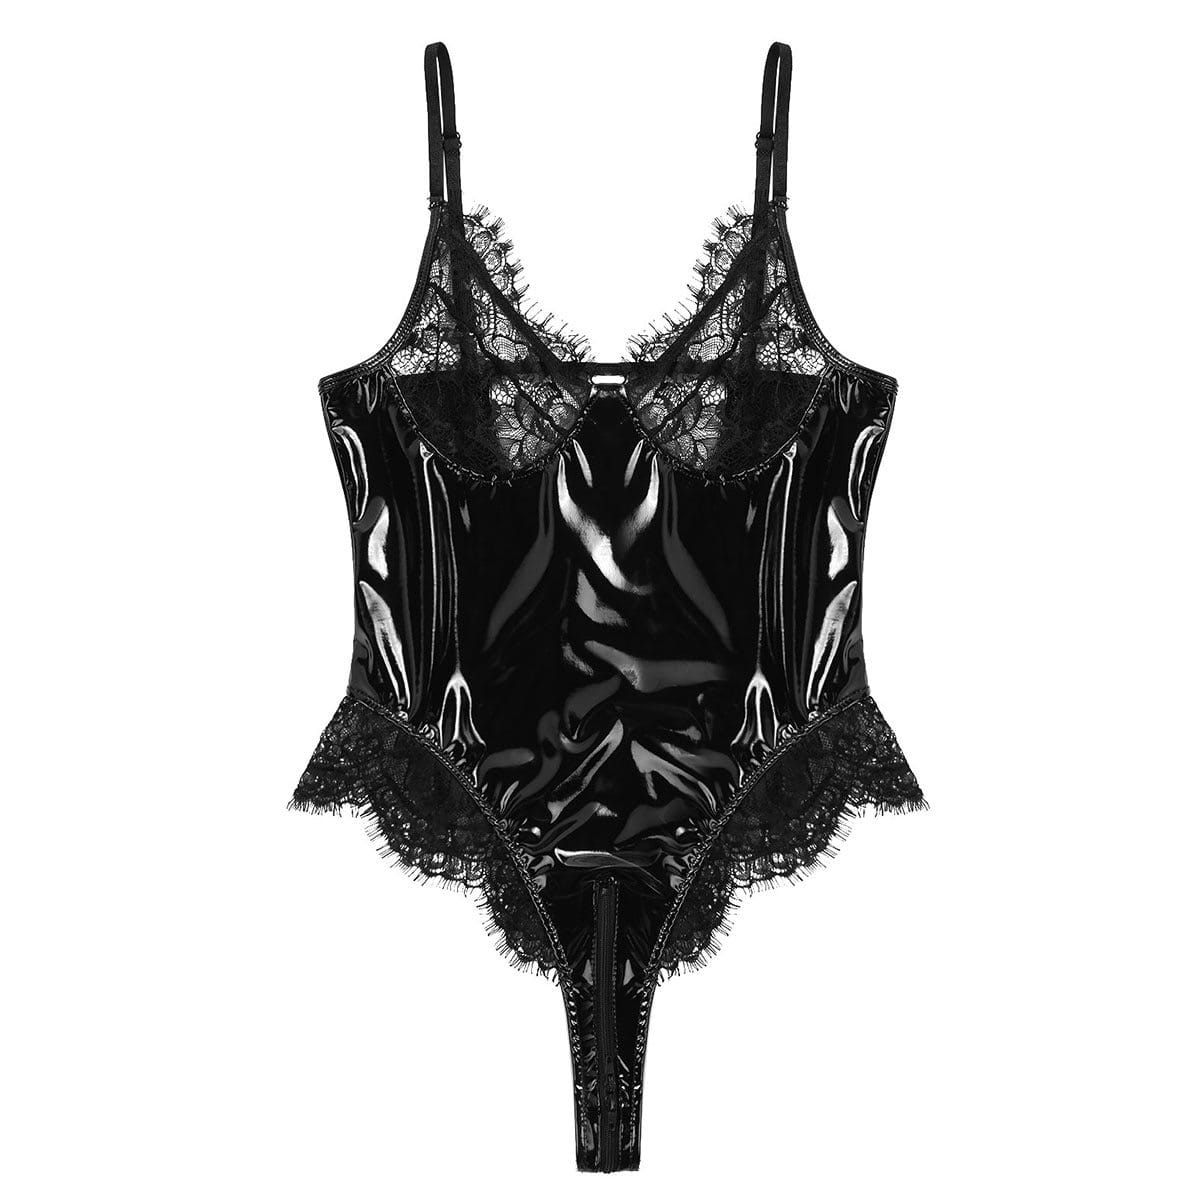 Lace Lingerie Latex One-Piece